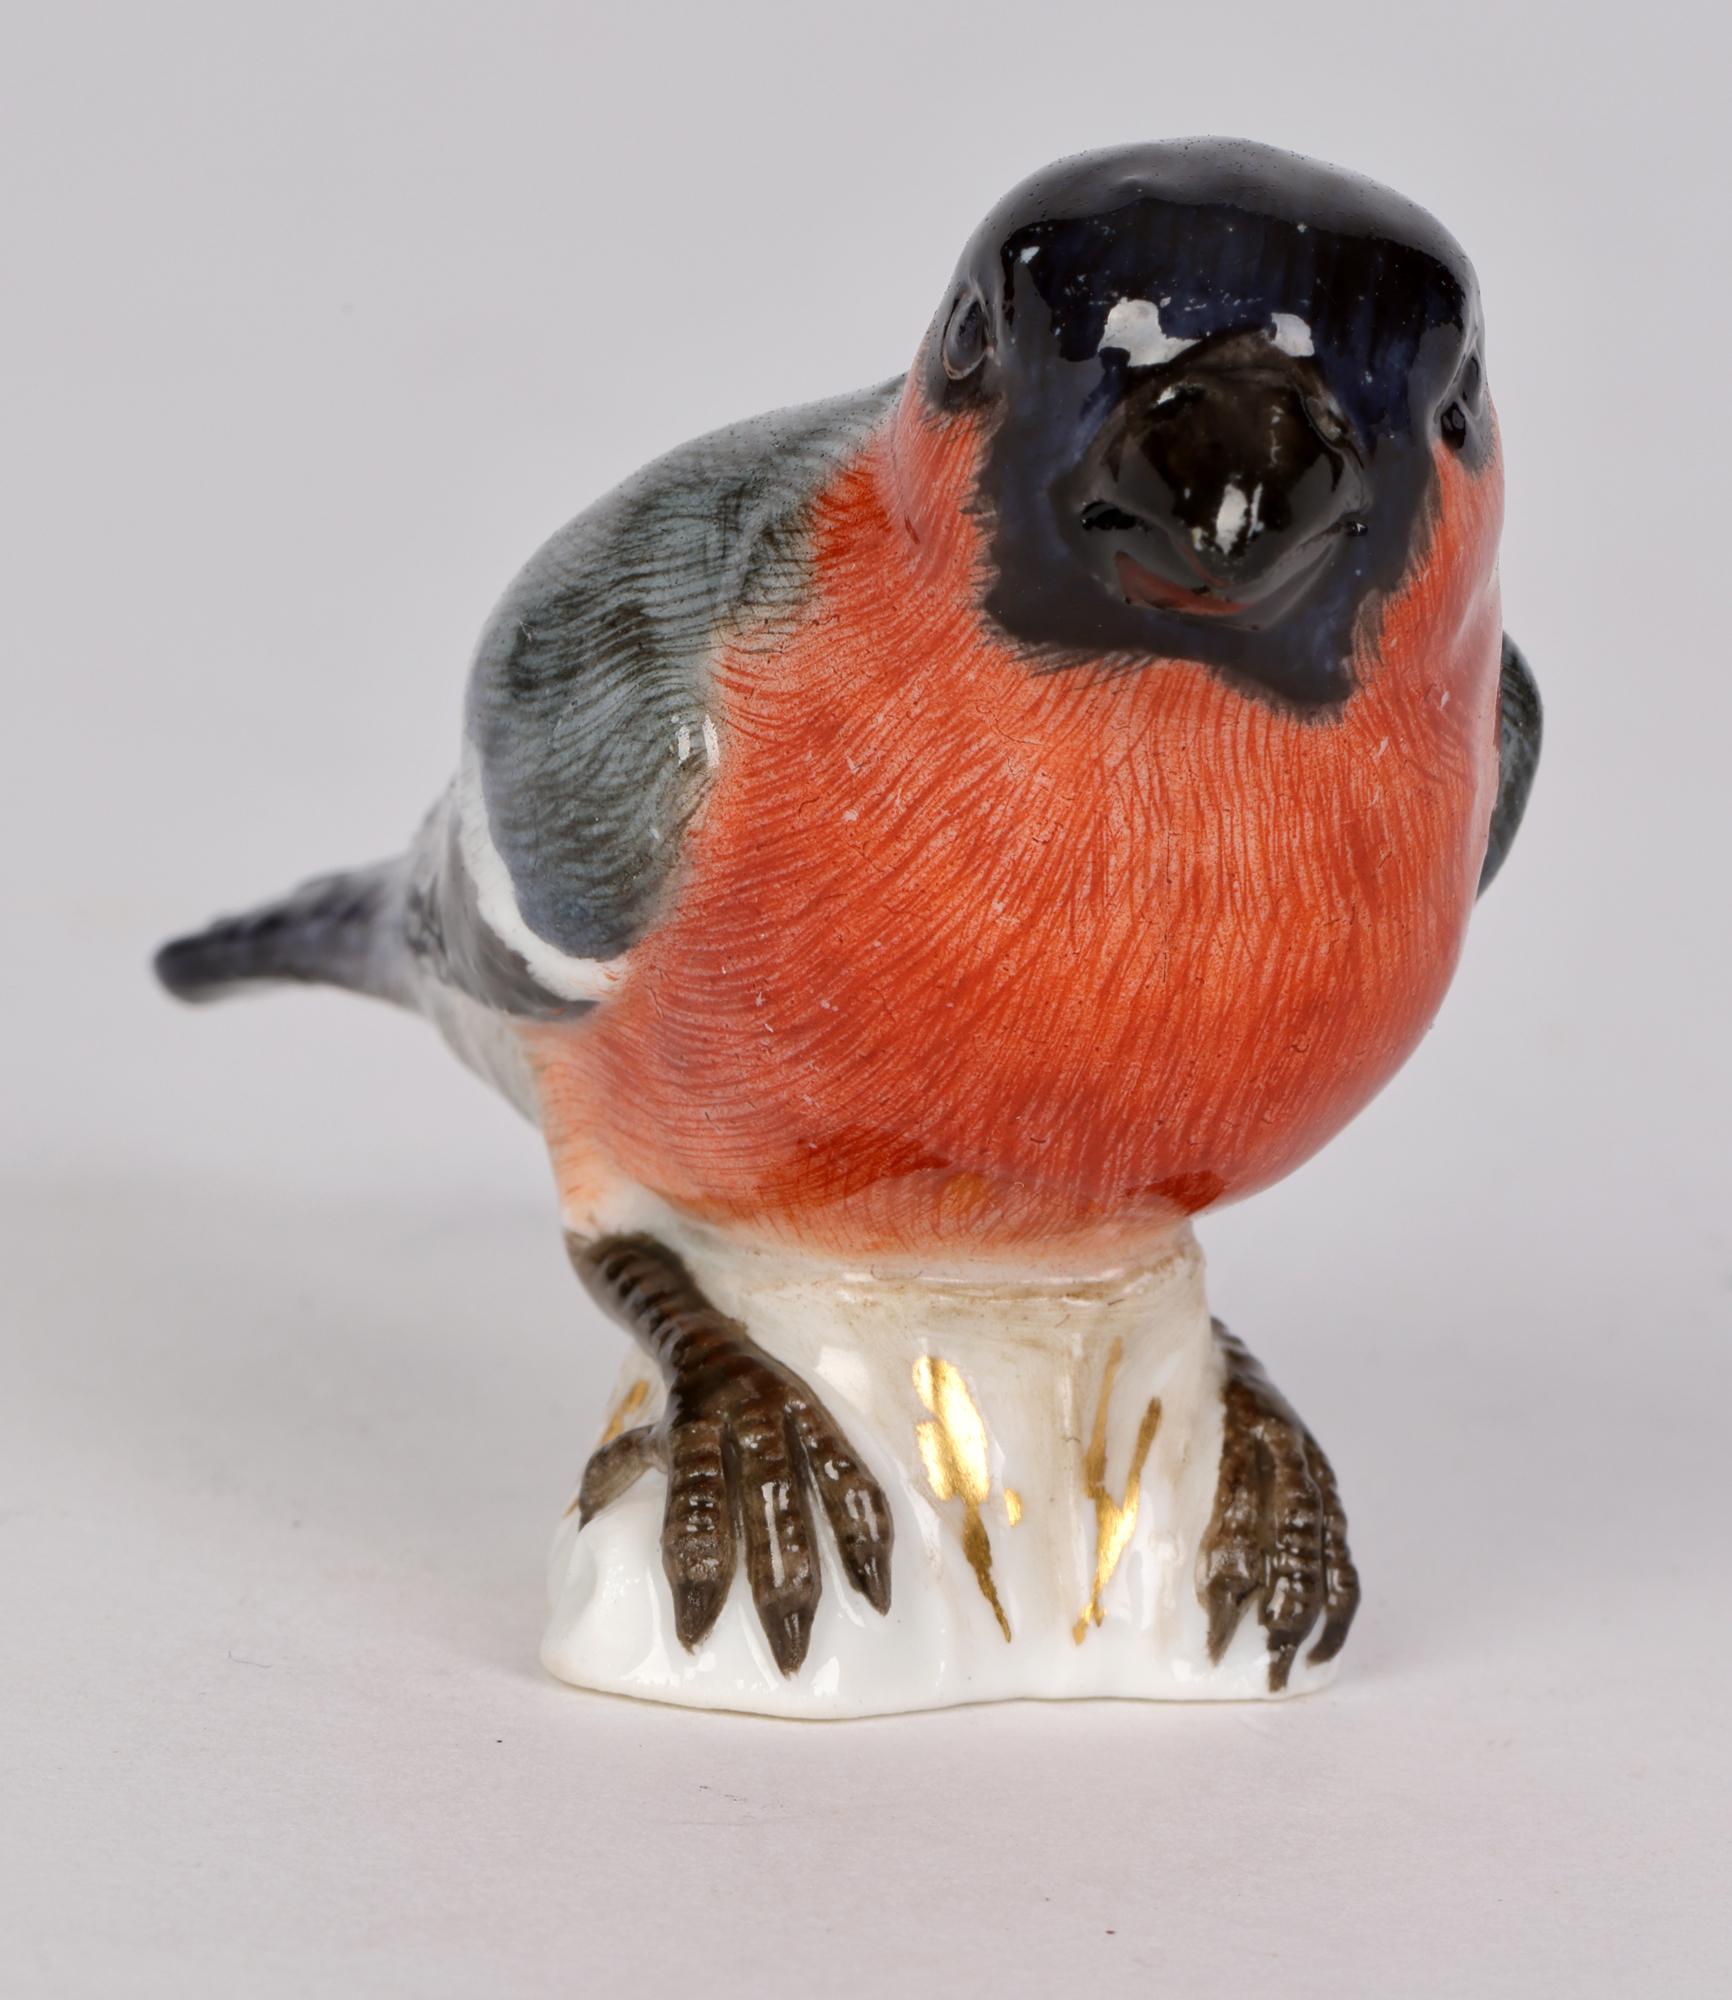 A fine antique German Meissen porcelain model of a Bullfinch bird dating from the latter 19th century. This heavily made and well modelled bird shows the Bullfinch perched on a raised rock work base with simple gilded grass like designs the bird is